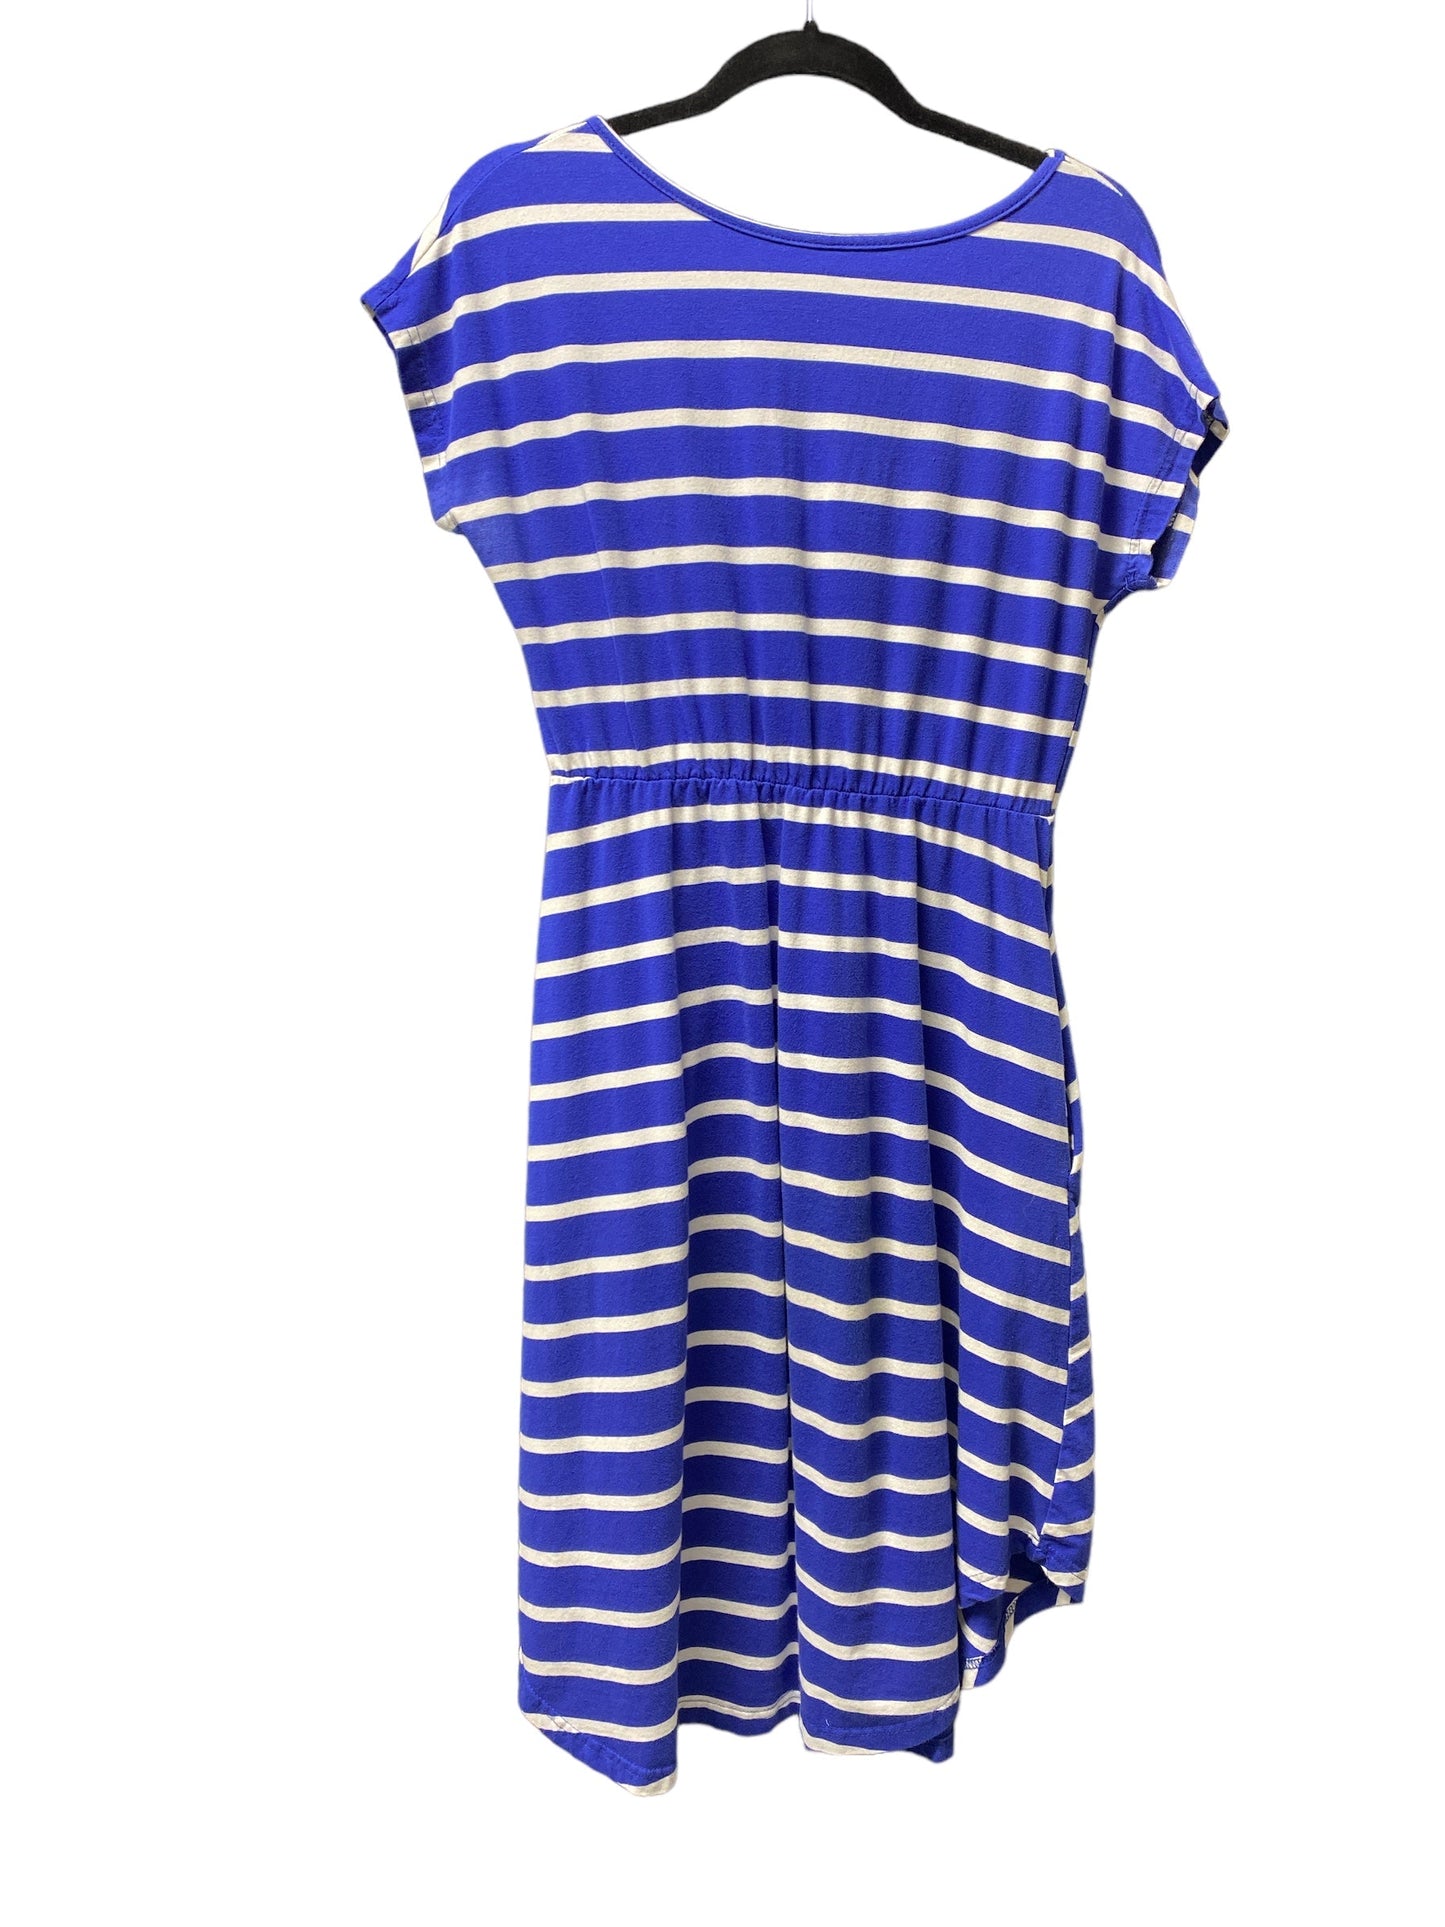 Striped Pattern Dress Casual Short Clothes Mentor, Size S